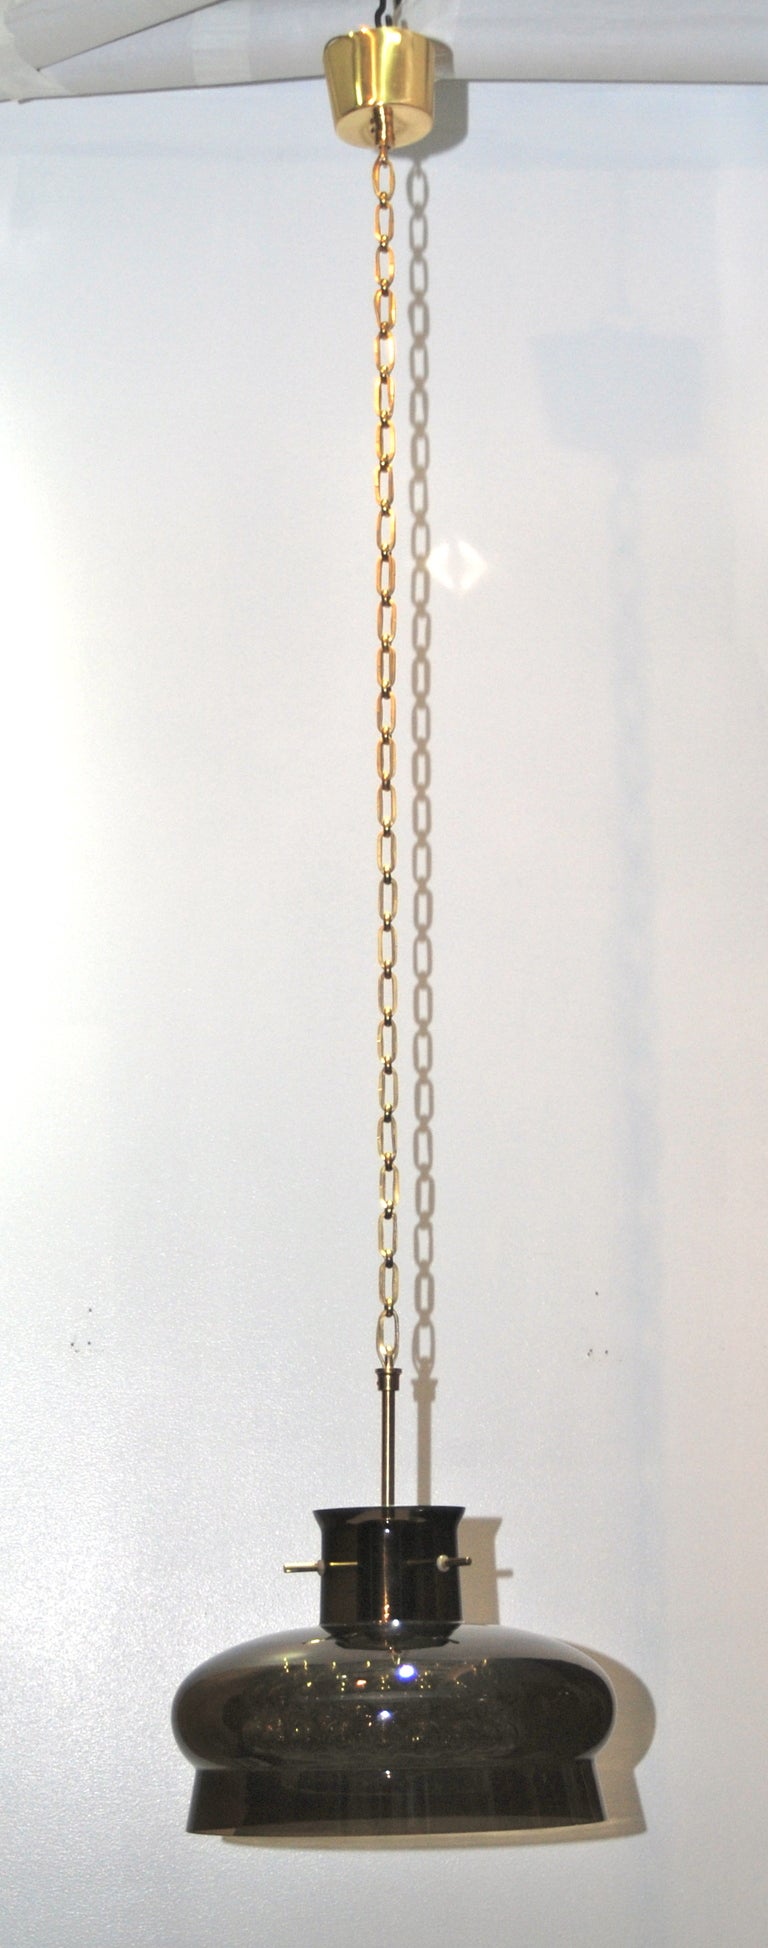 Glass pendant by Carl Fagerlund fro Orrefors, Sweden.
Double glass shades on brass chain. Orrefors labelled.
Drop with a chain 53